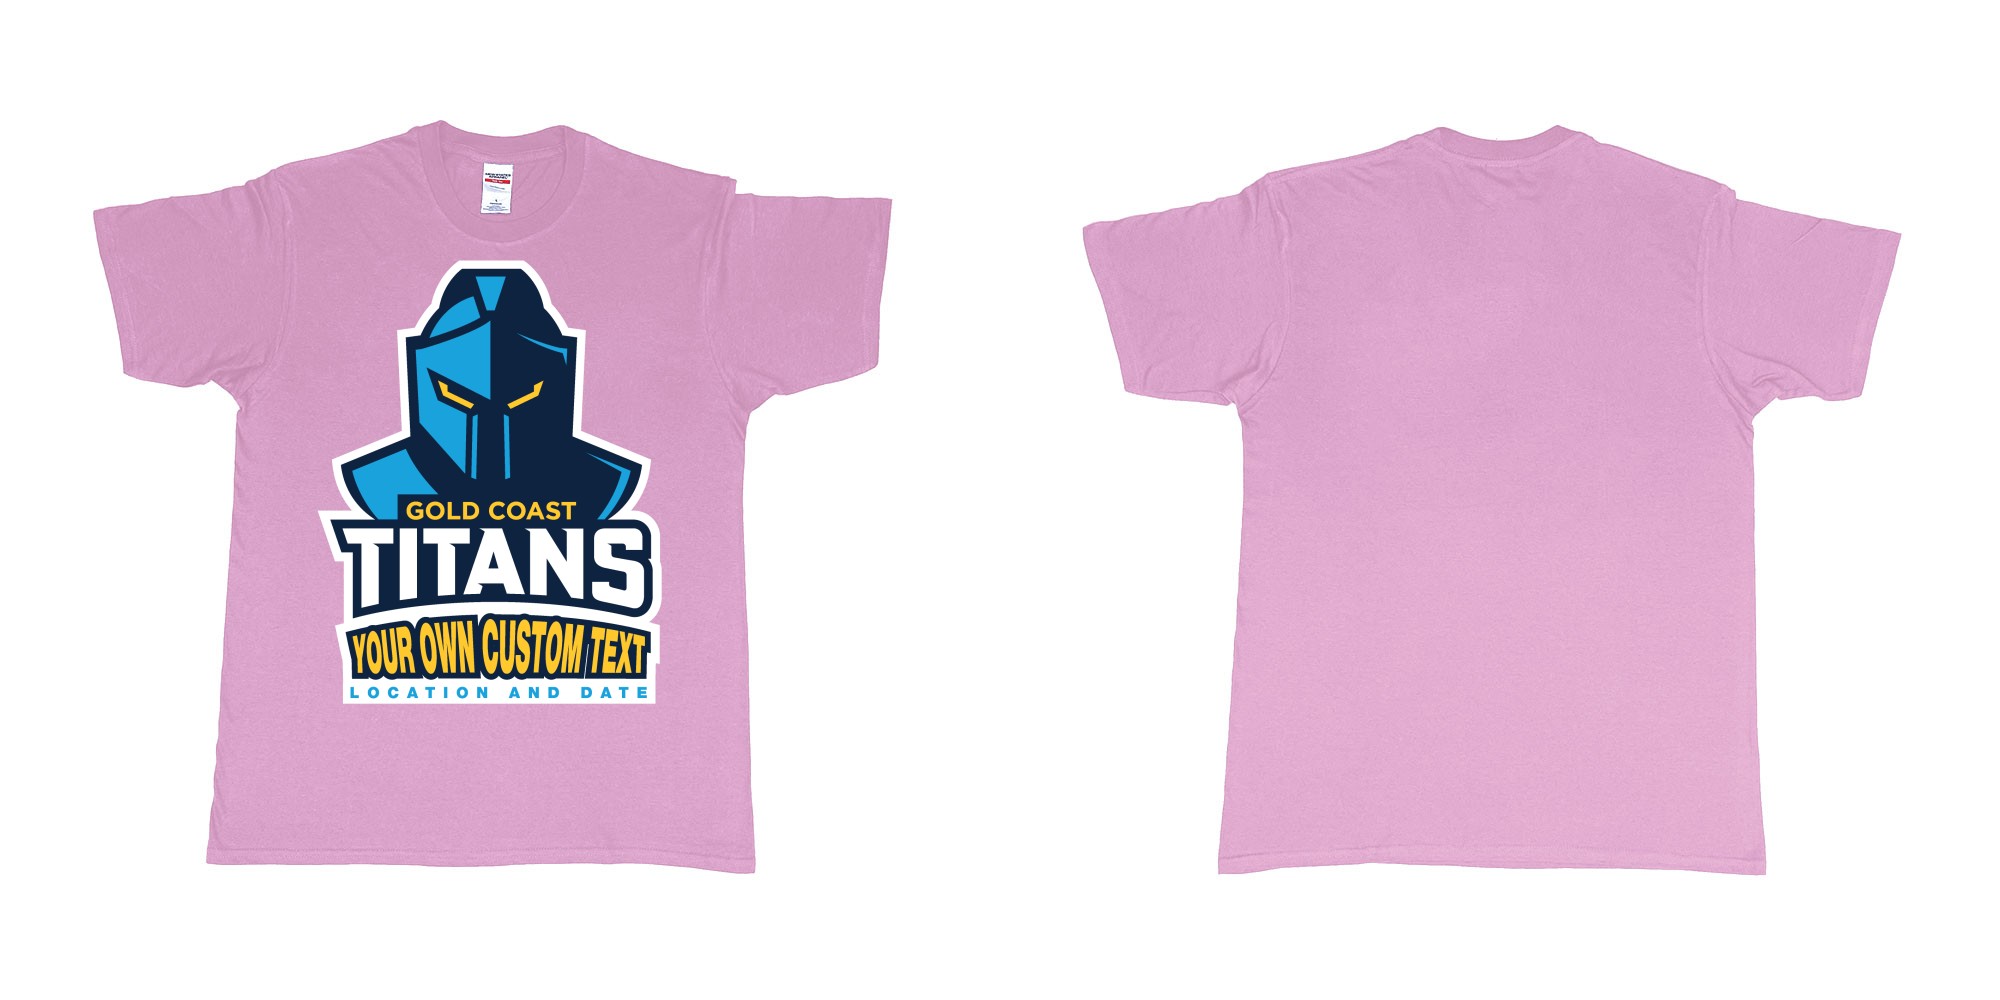 Custom tshirt design gold coast titans own custom design print in fabric color light-pink choice your own text made in Bali by The Pirate Way